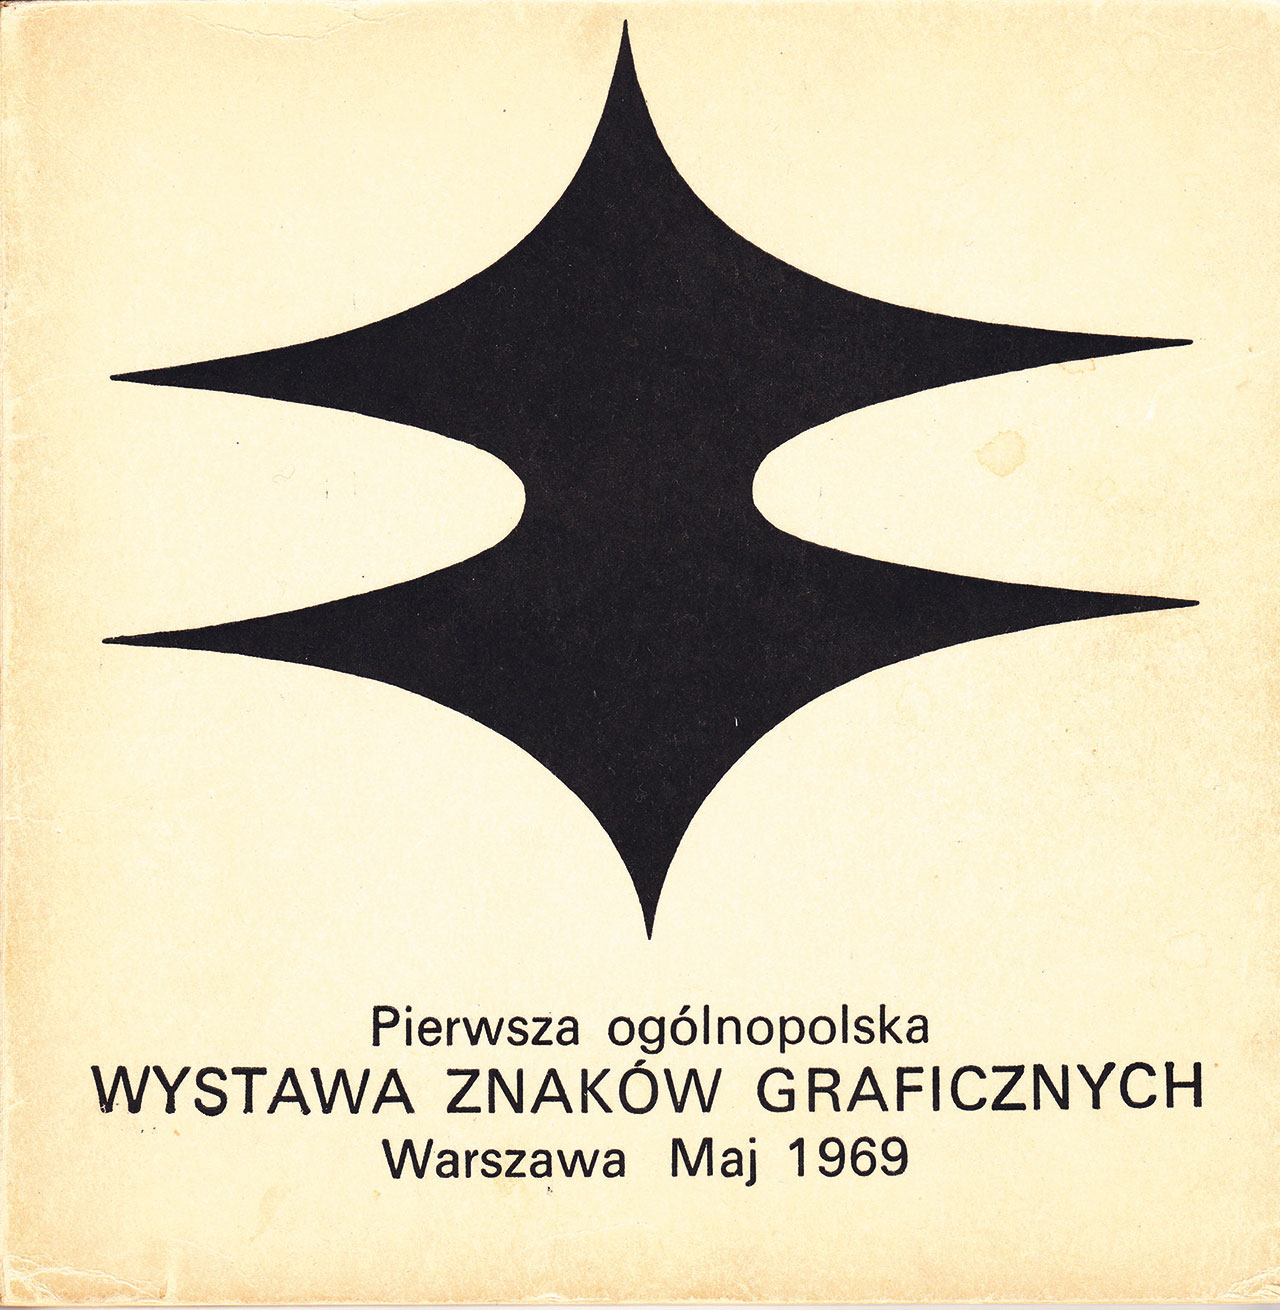 Polish graphic design from 1969